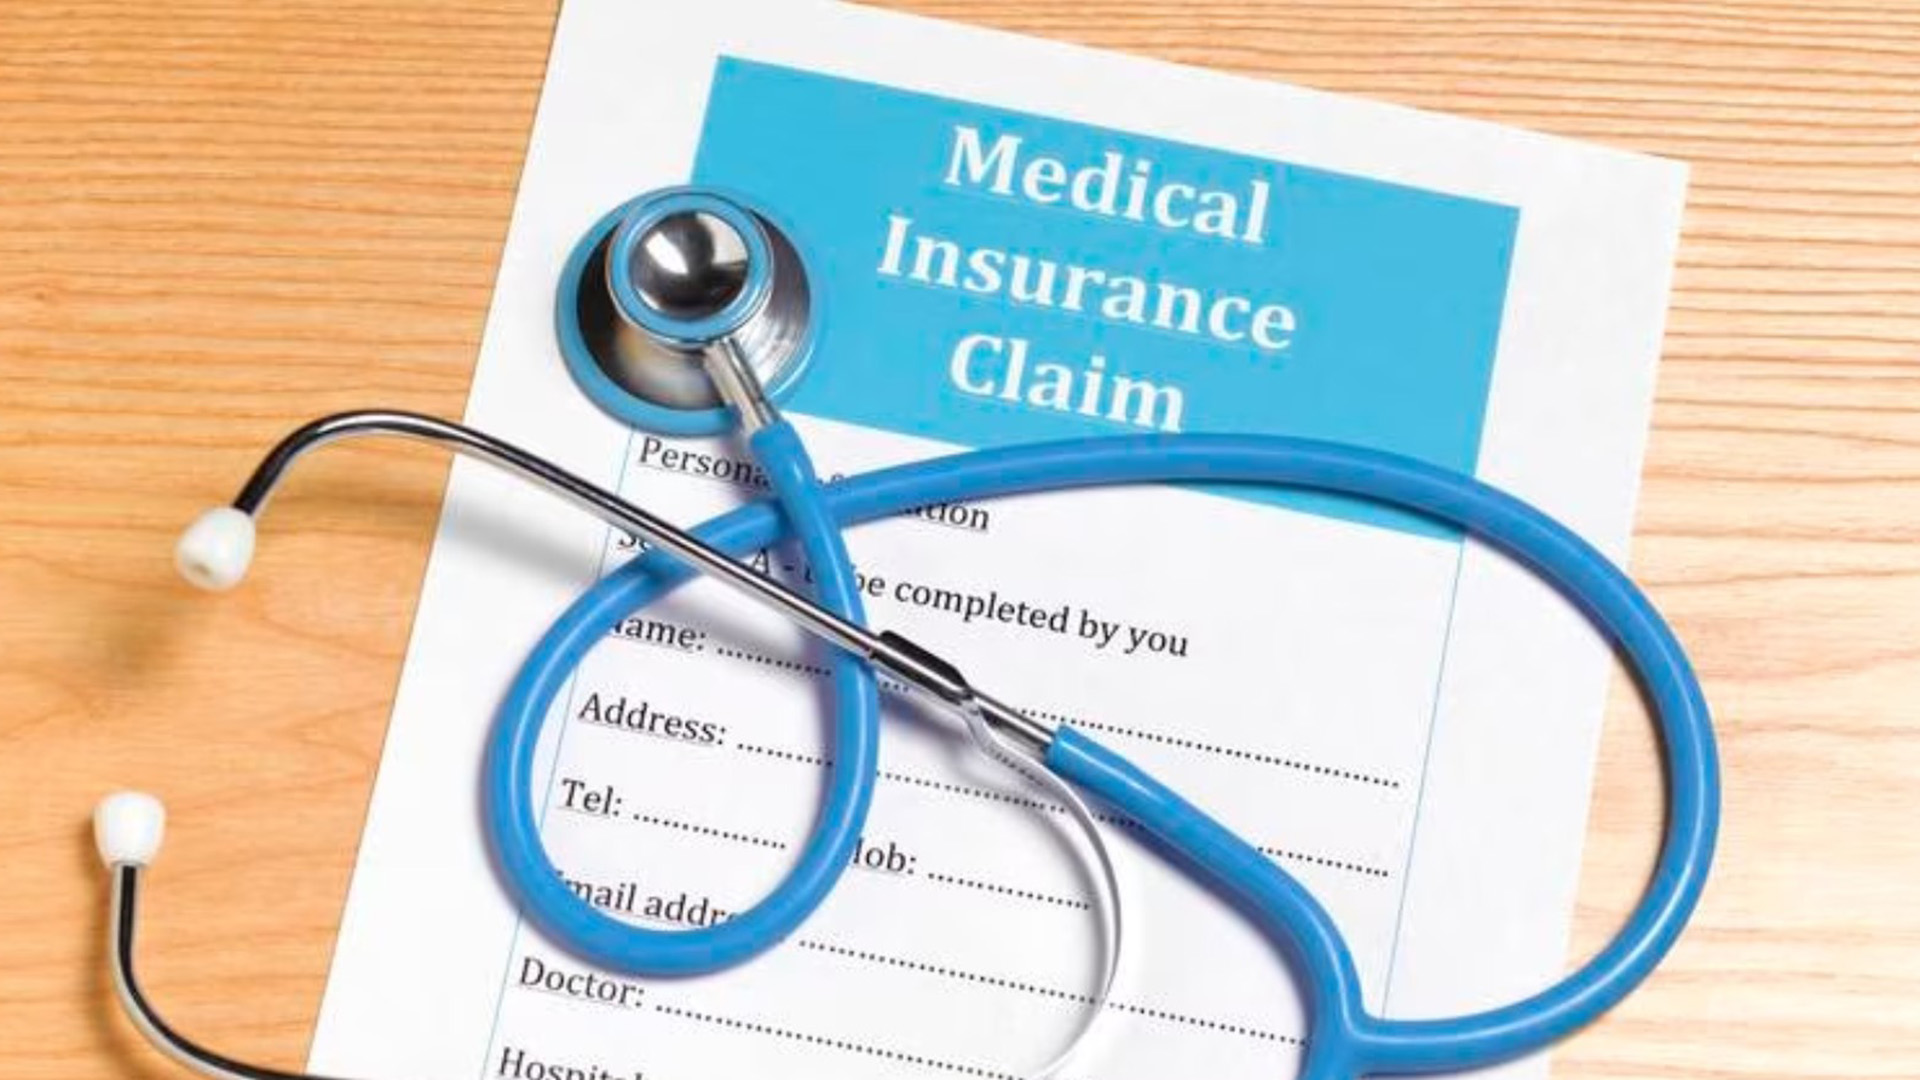 UAE health care: what does basic insurance provide?